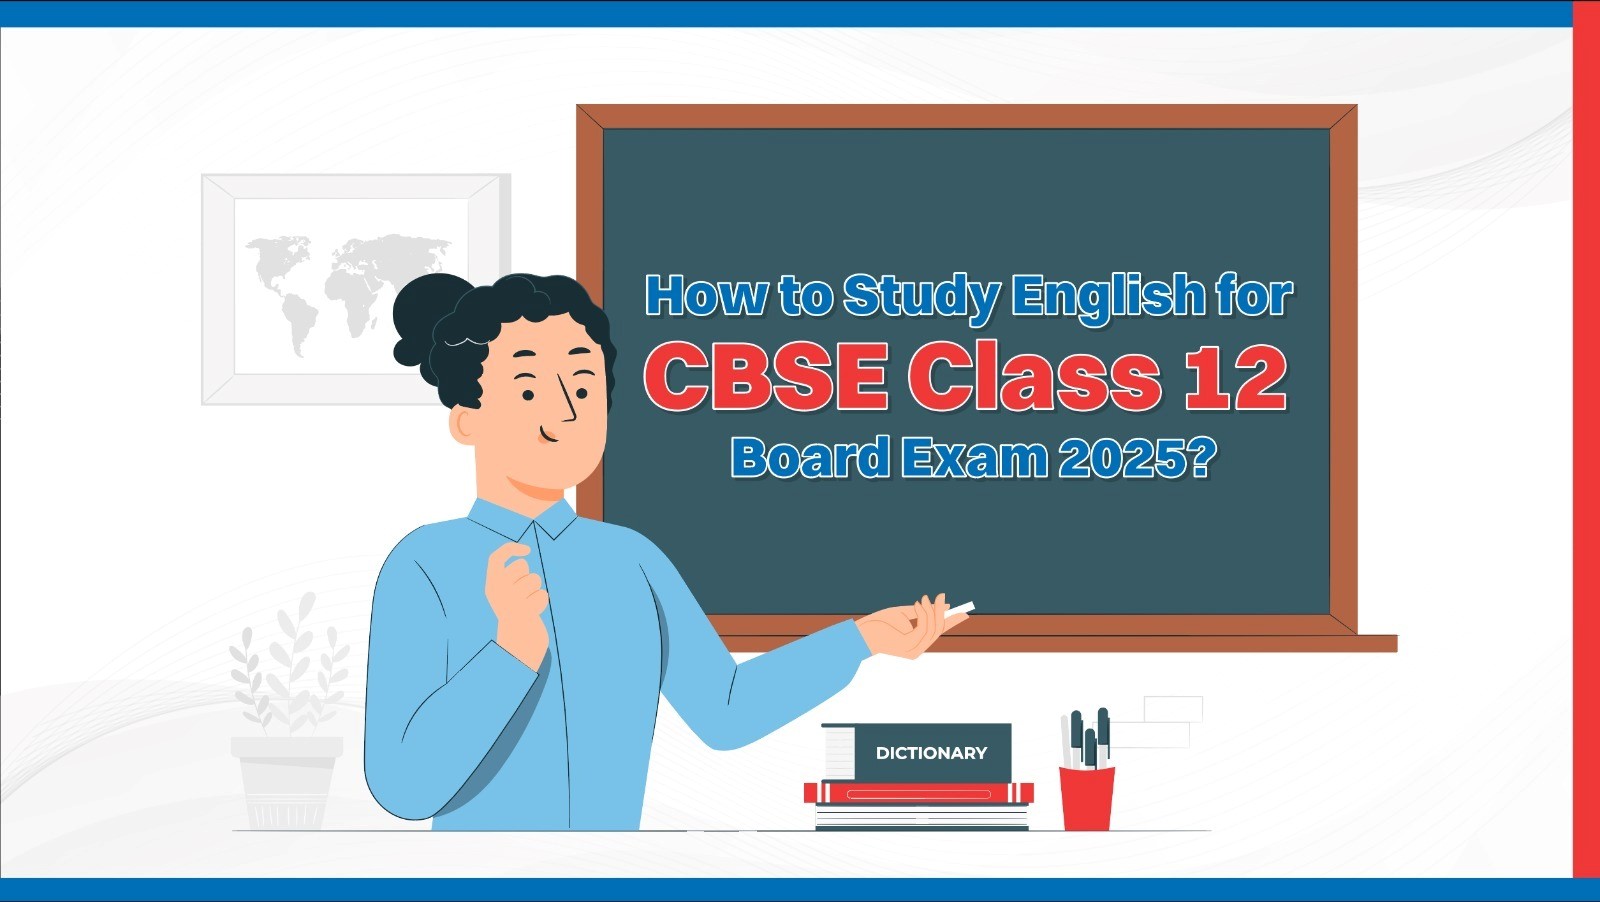 How to Study English for CBSE Class 12 Board Exam 2025.jpg